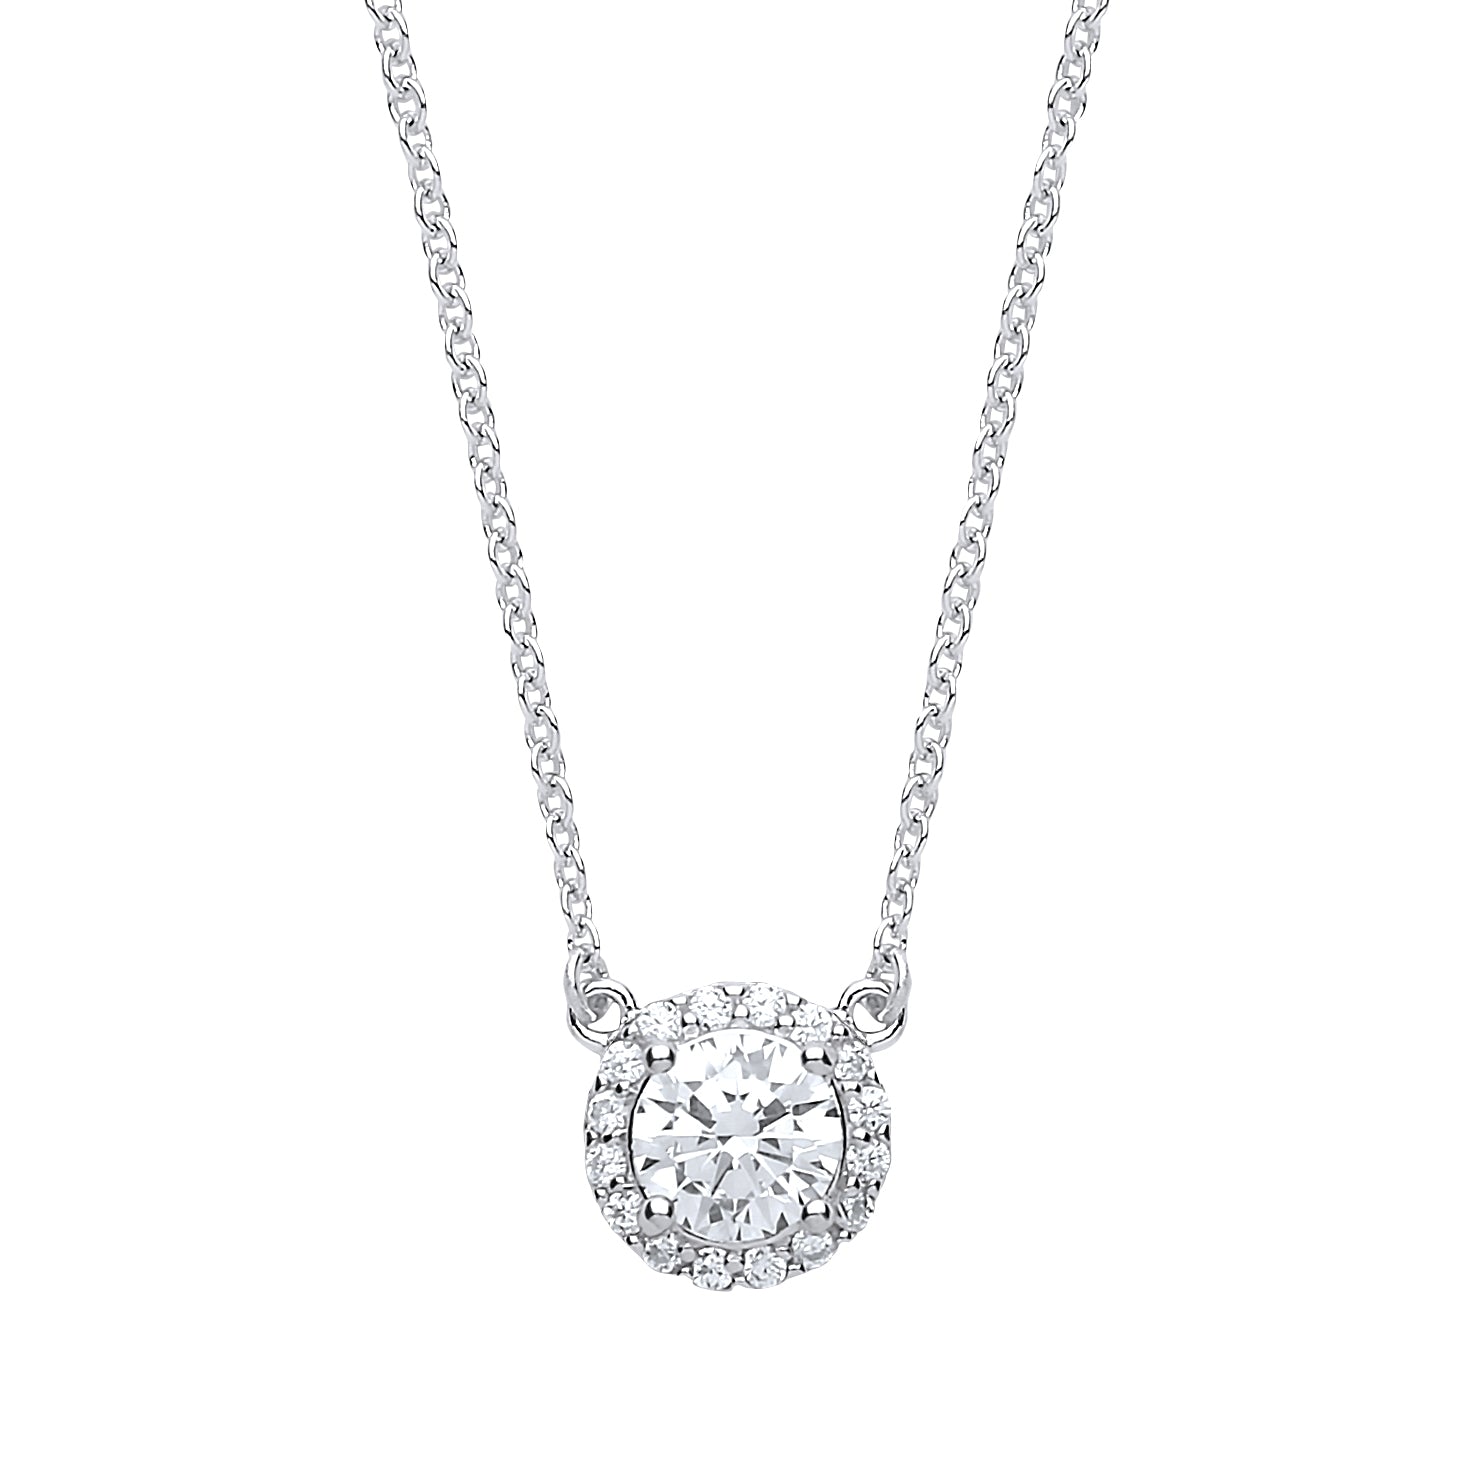 Silver  CZ Solitaire Halo Charm Necklace 15 + 2 inch - GVK158WH